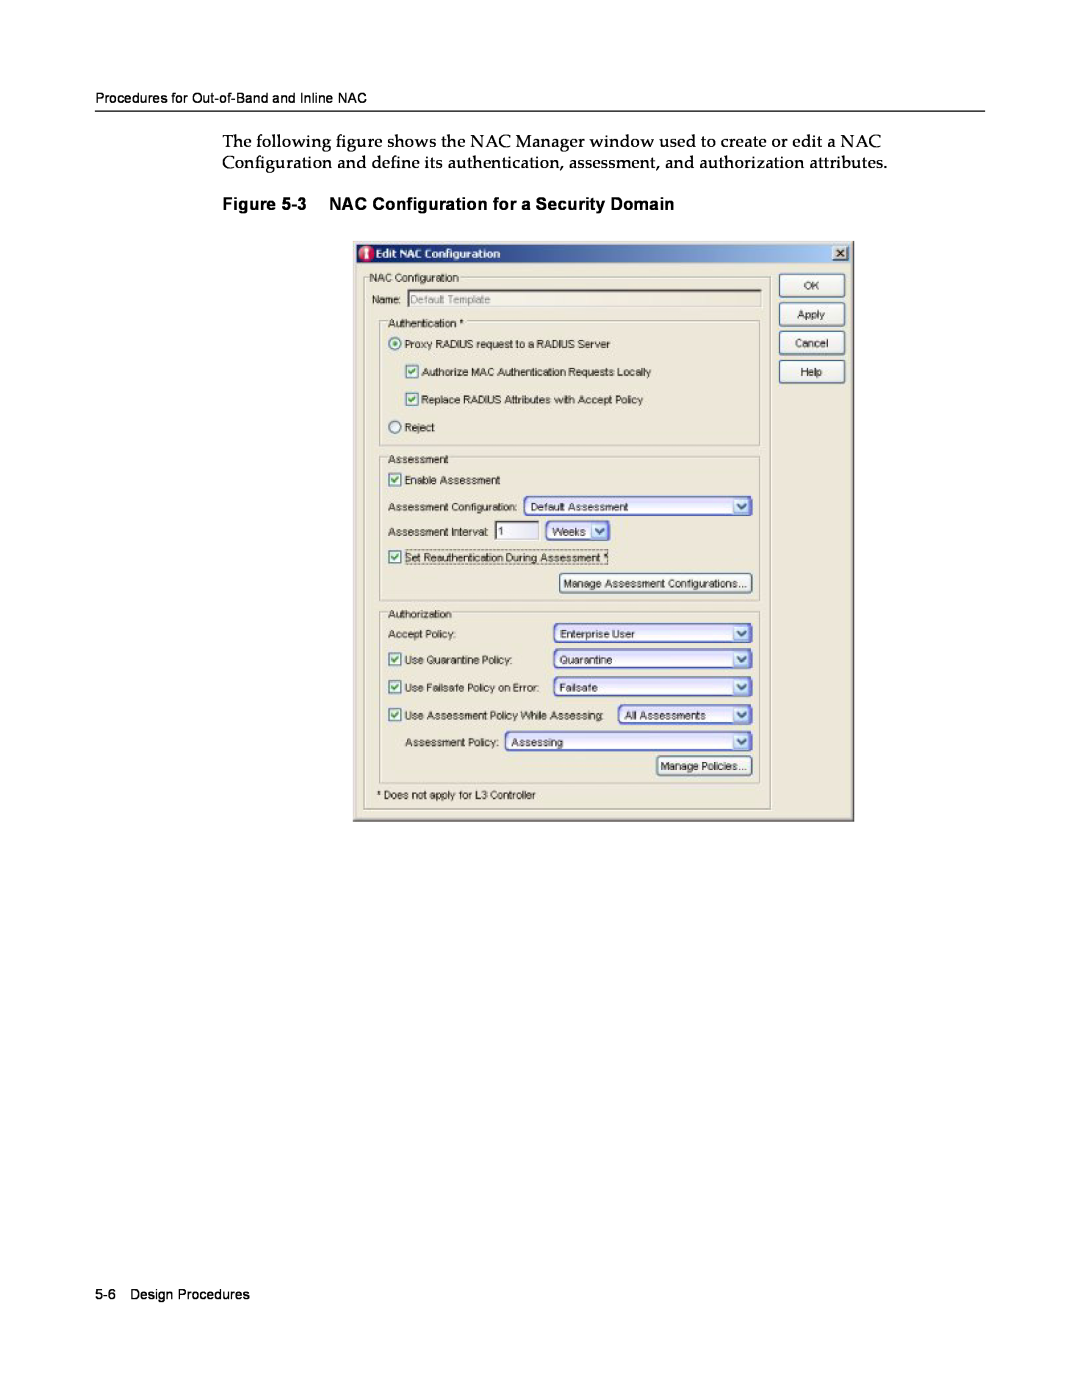 Enterasys Networks 9034385 manual 3 NAC Configuration for a Security Domain, Procedures for Out-of-Band and Inline NAC 